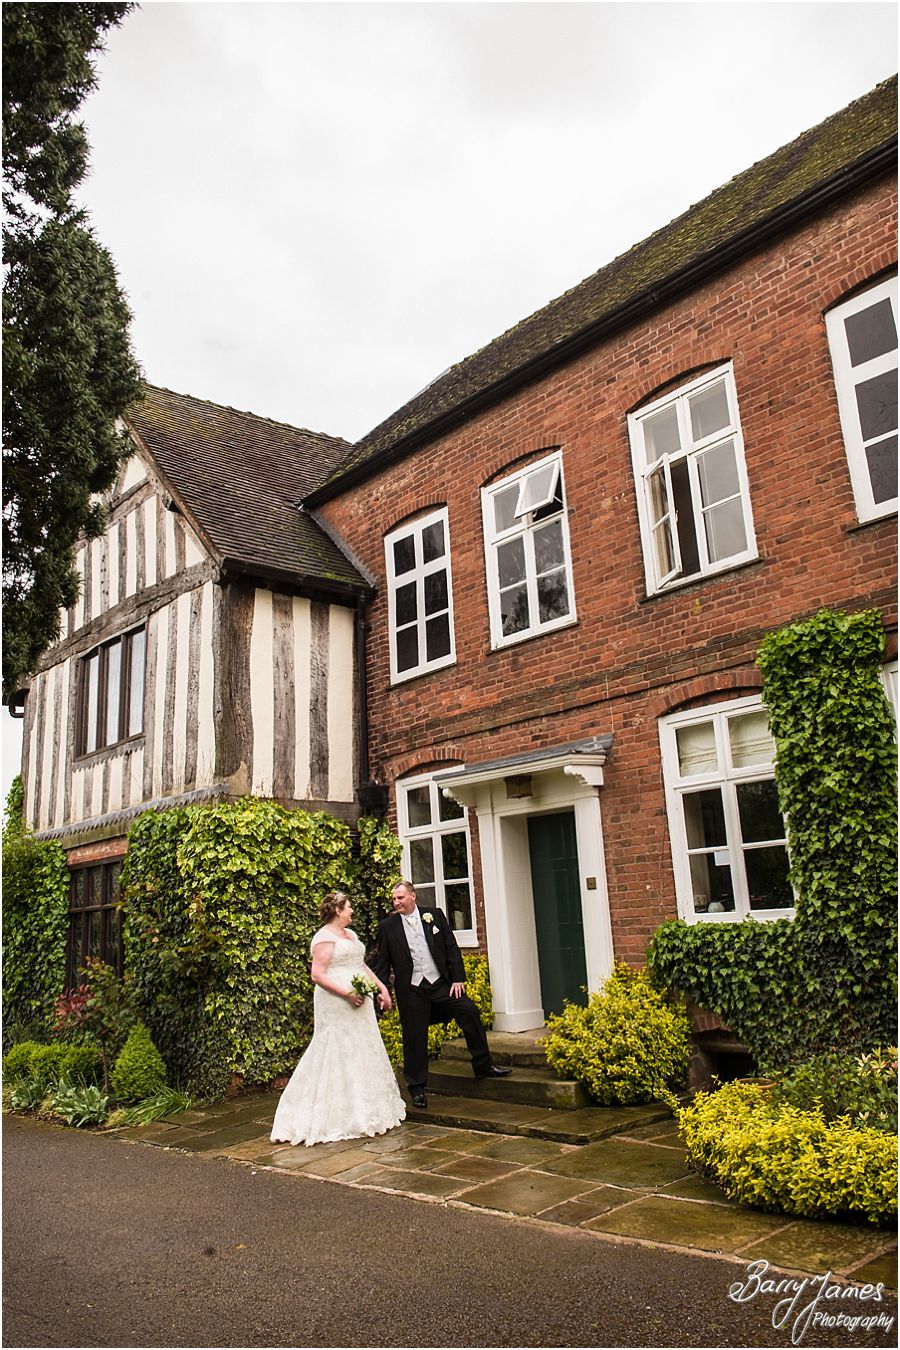 Storytelling wedding photography at The Moat House in Acton Trussell by Contemporary and Creative Wedding Photographer Barry James